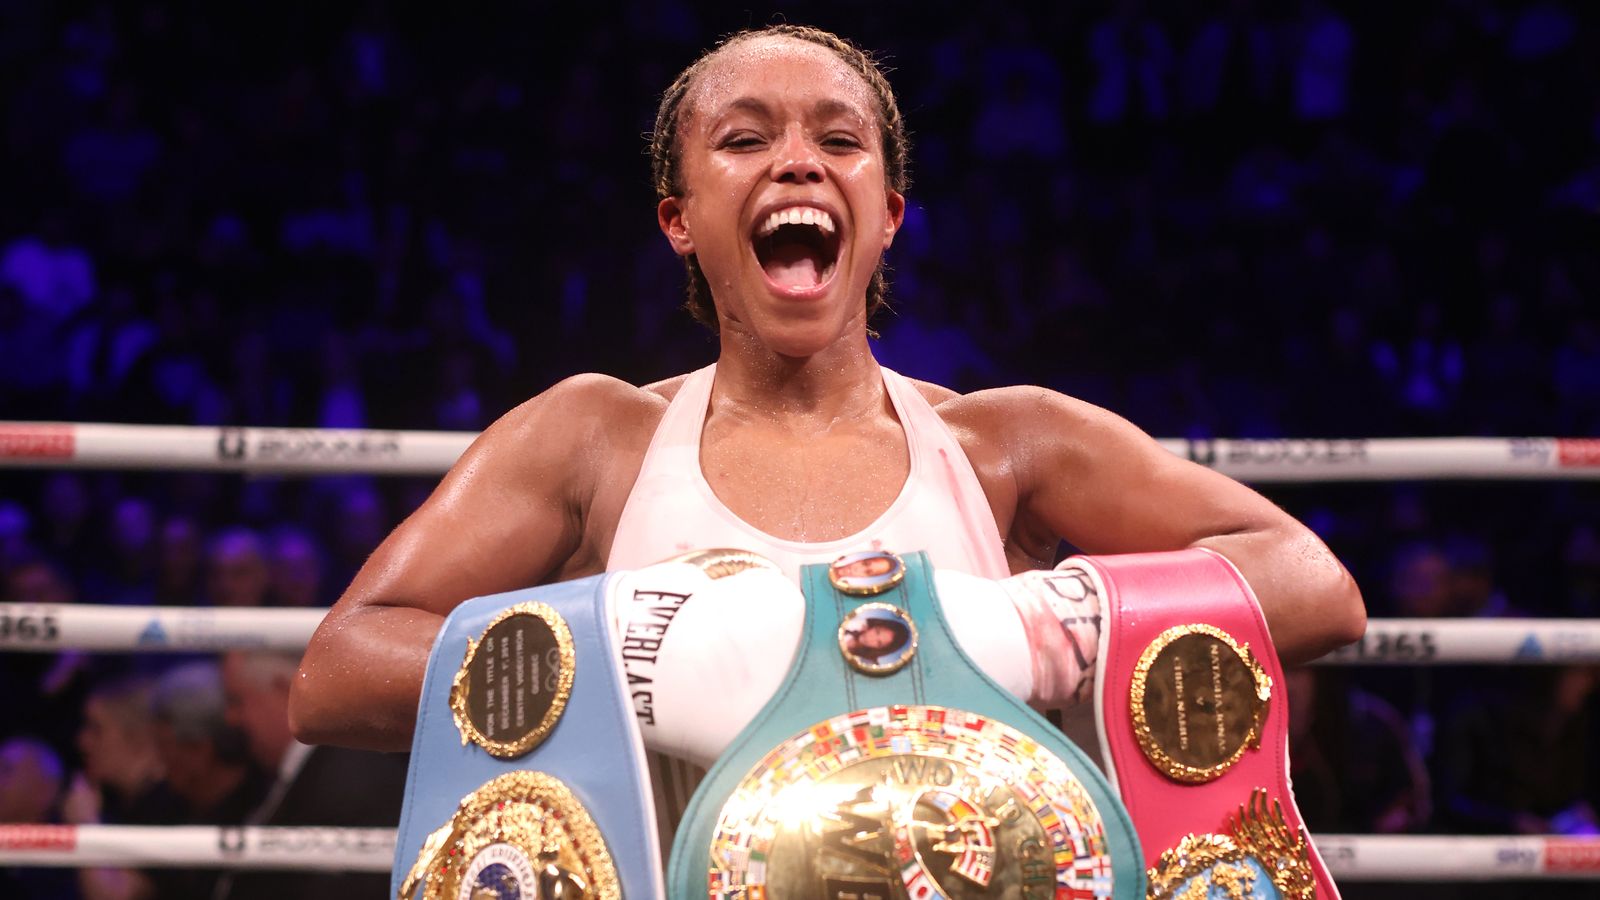 Natasha Jonas will fight on the undercard of Liam Smith's rematch to defend her WBO, WBC, and IBF titles.